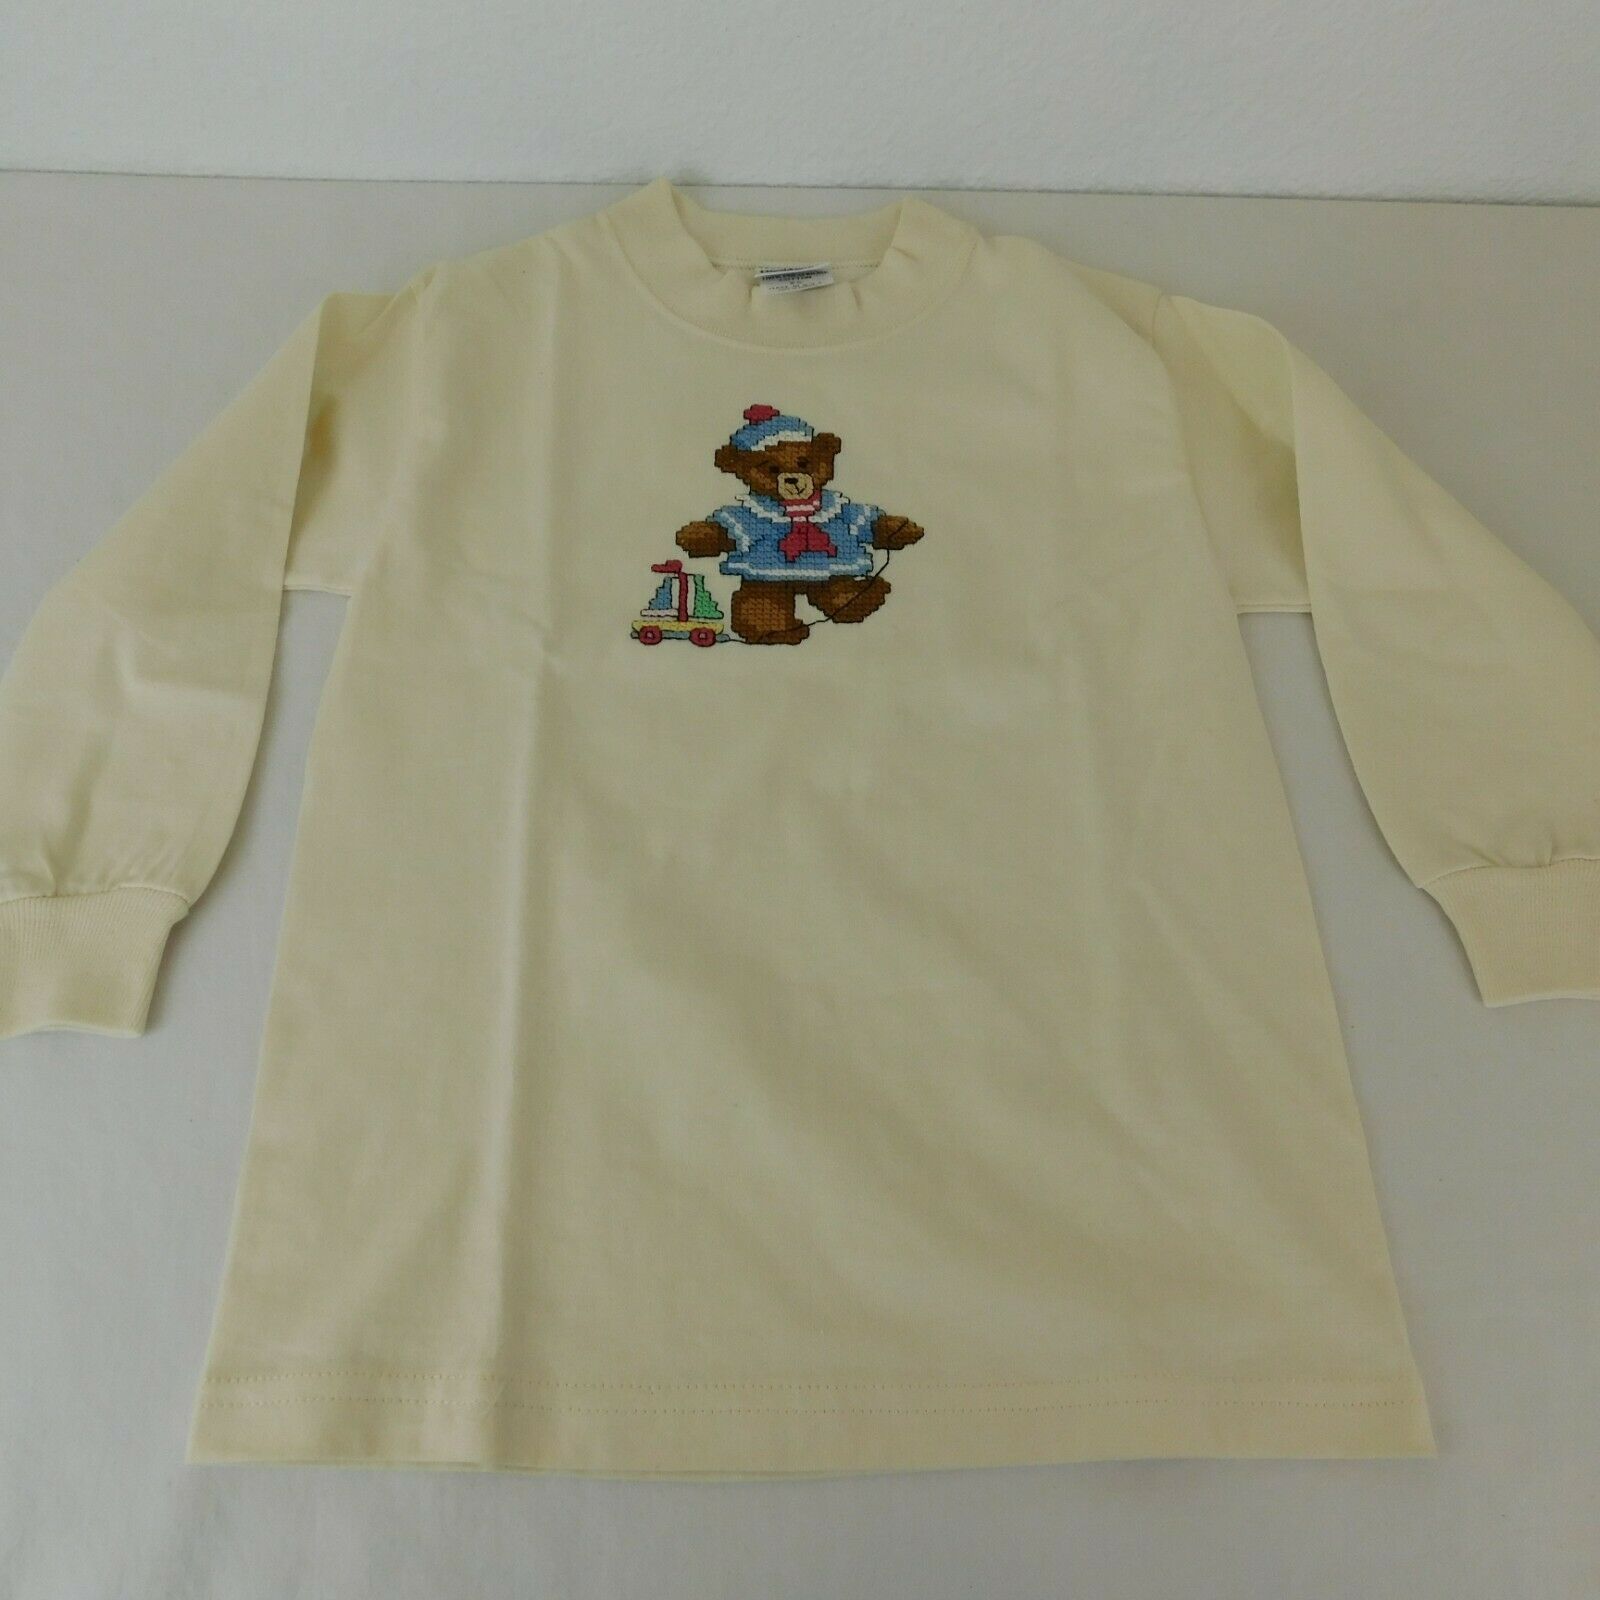 Sailor Teddy Bear Stitch a Shirt Completed on Long Sleeve Size XS Kids Shirt - $14.52